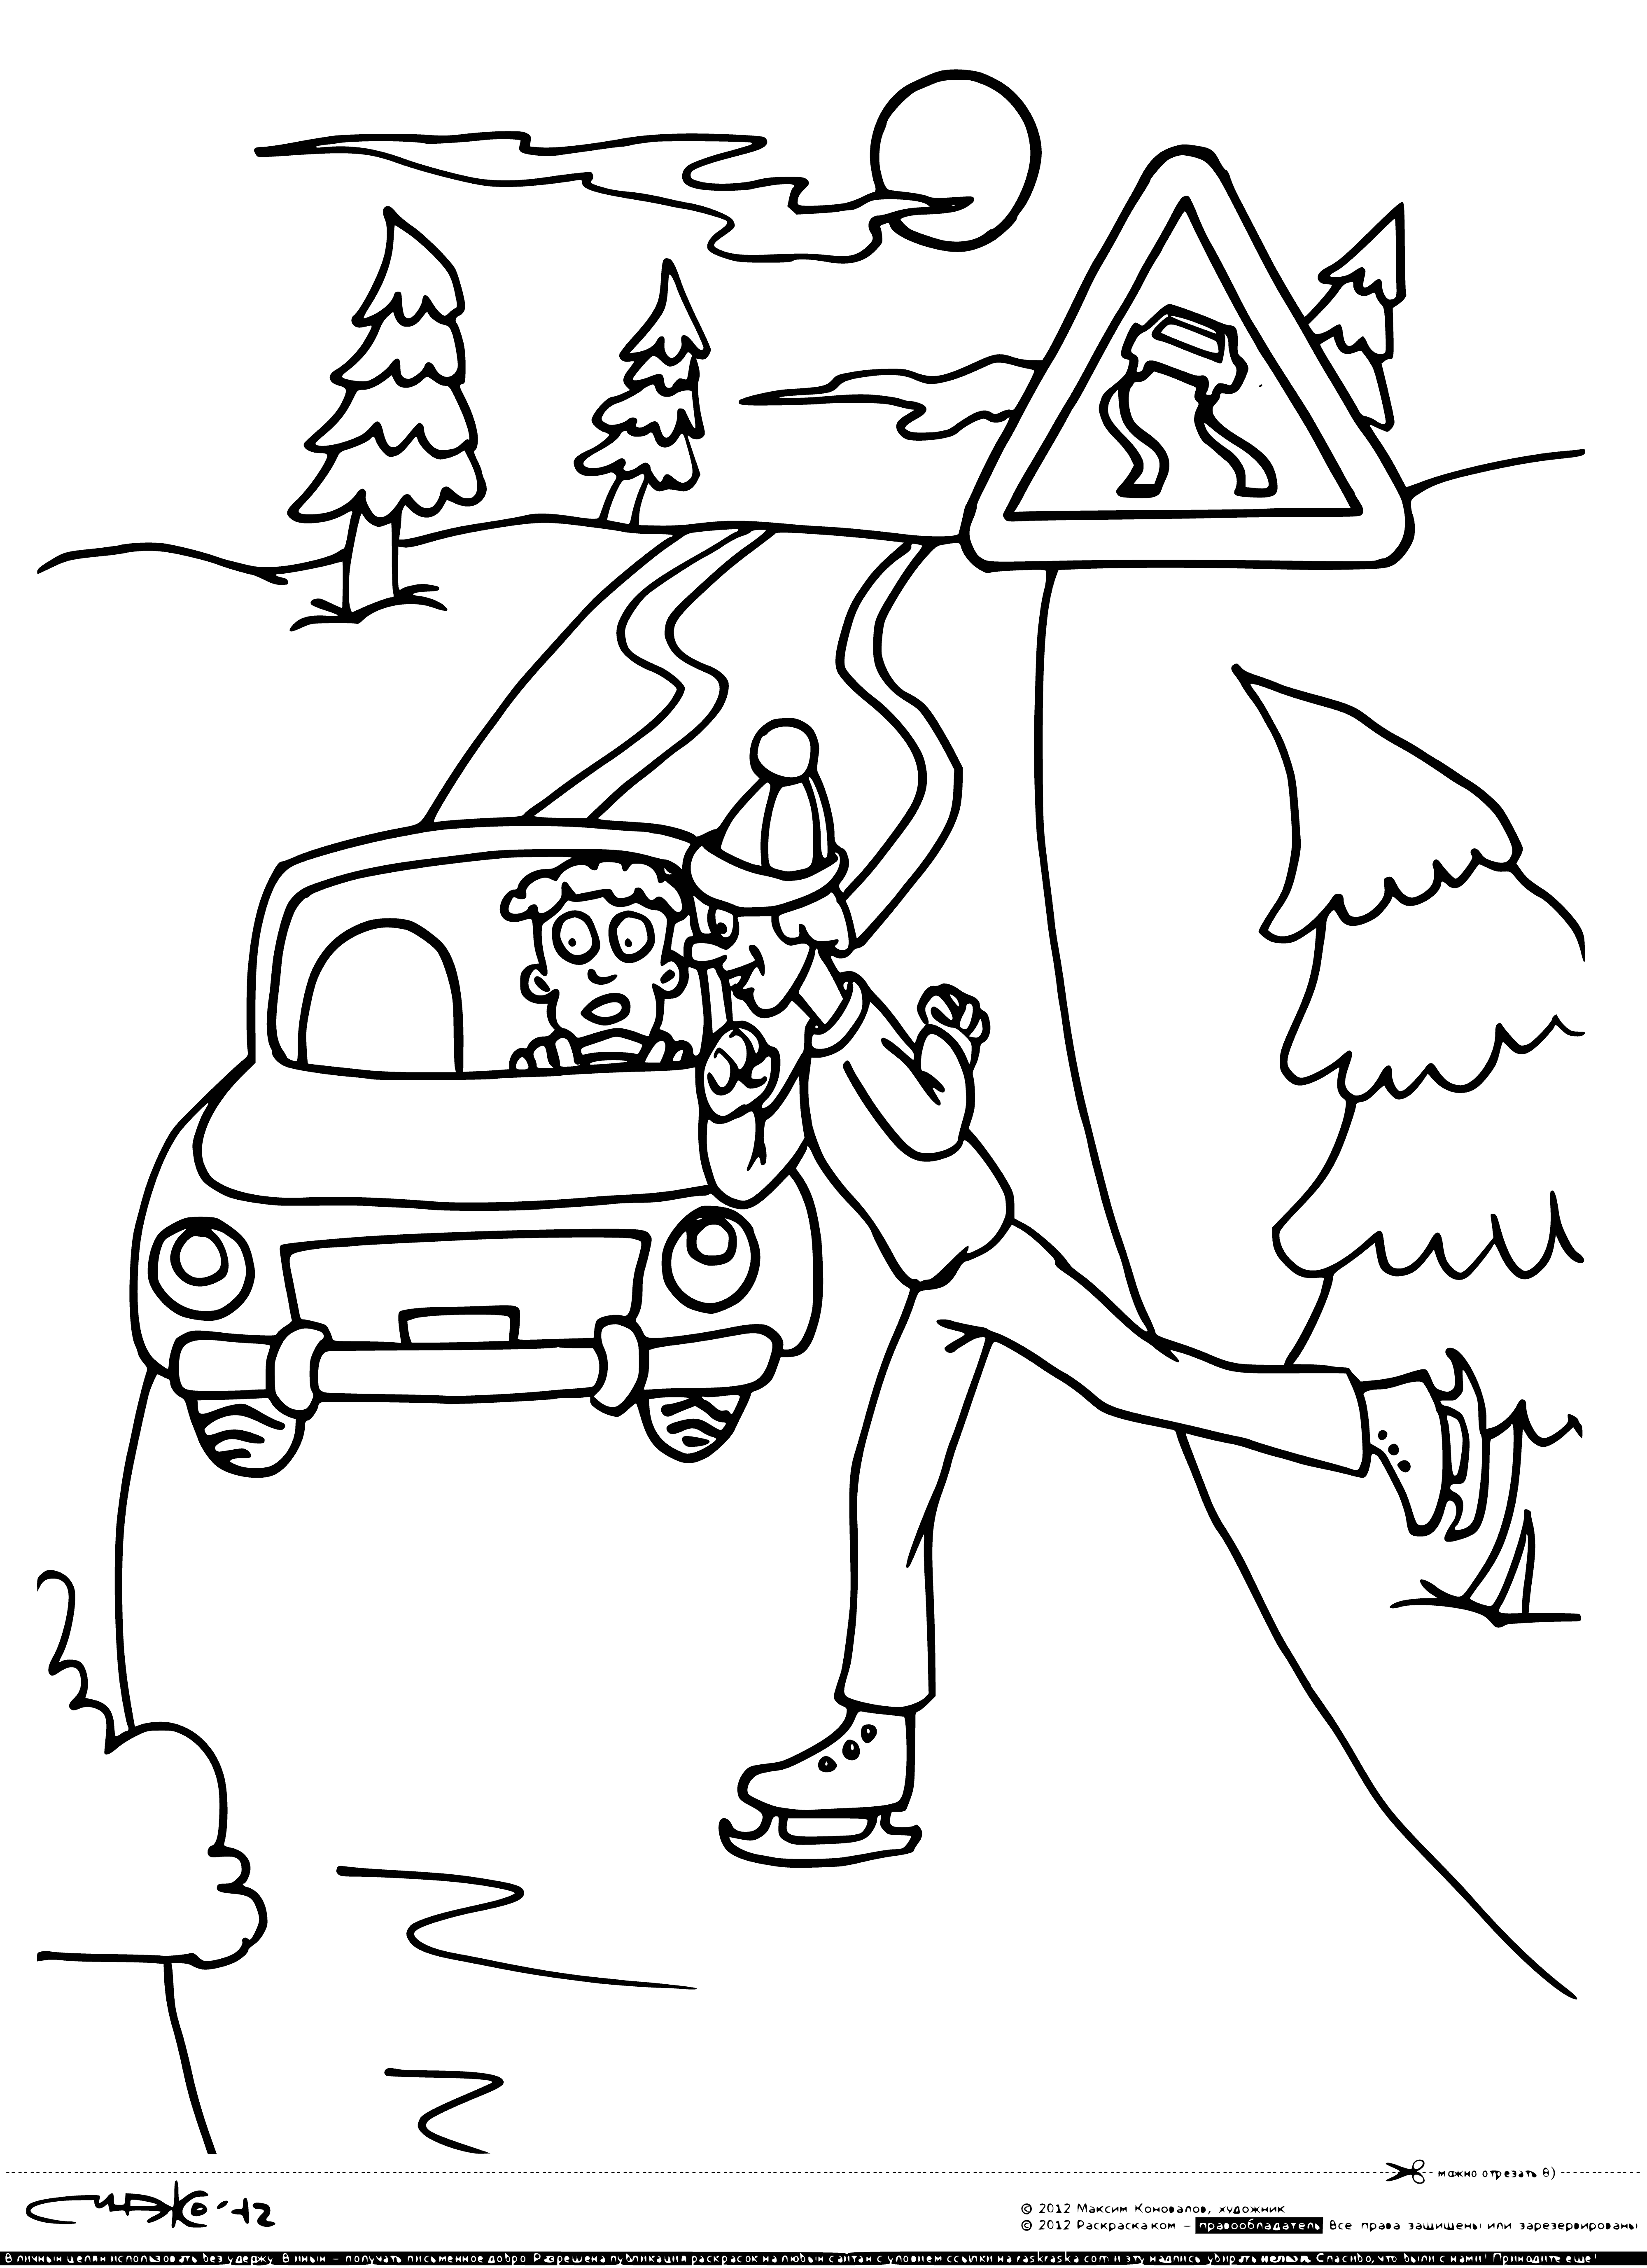 coloring page: Warning sign of slippery road: yellow background, black symbol of car slipping on ice. #DrivingSafety